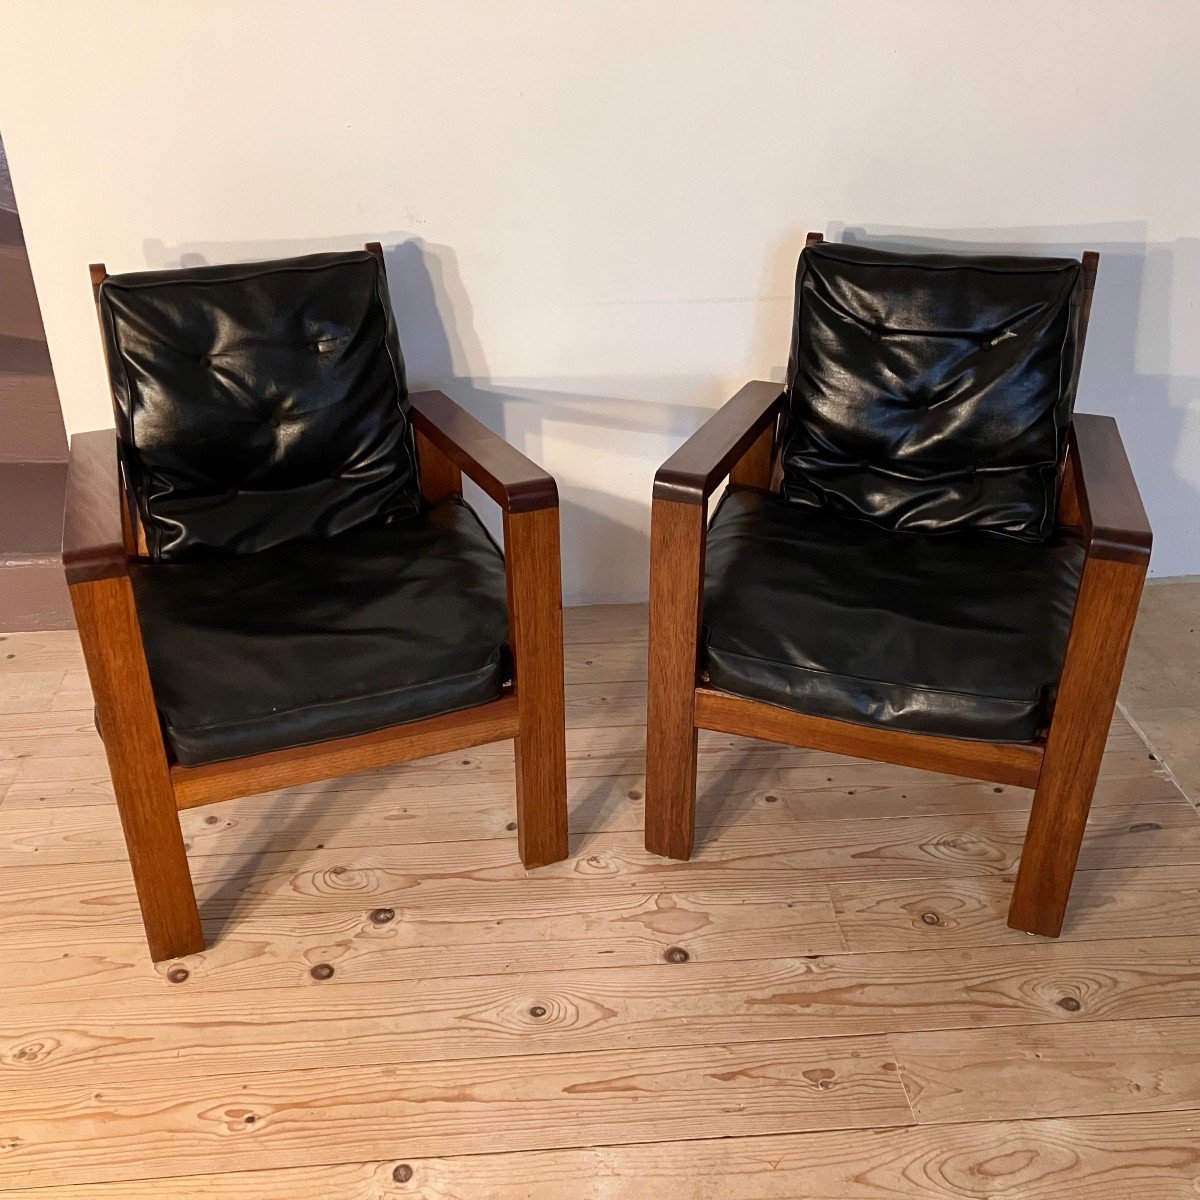 Pair Of Armchairs From The 1940s-1950s In Mahogany Or Teak.